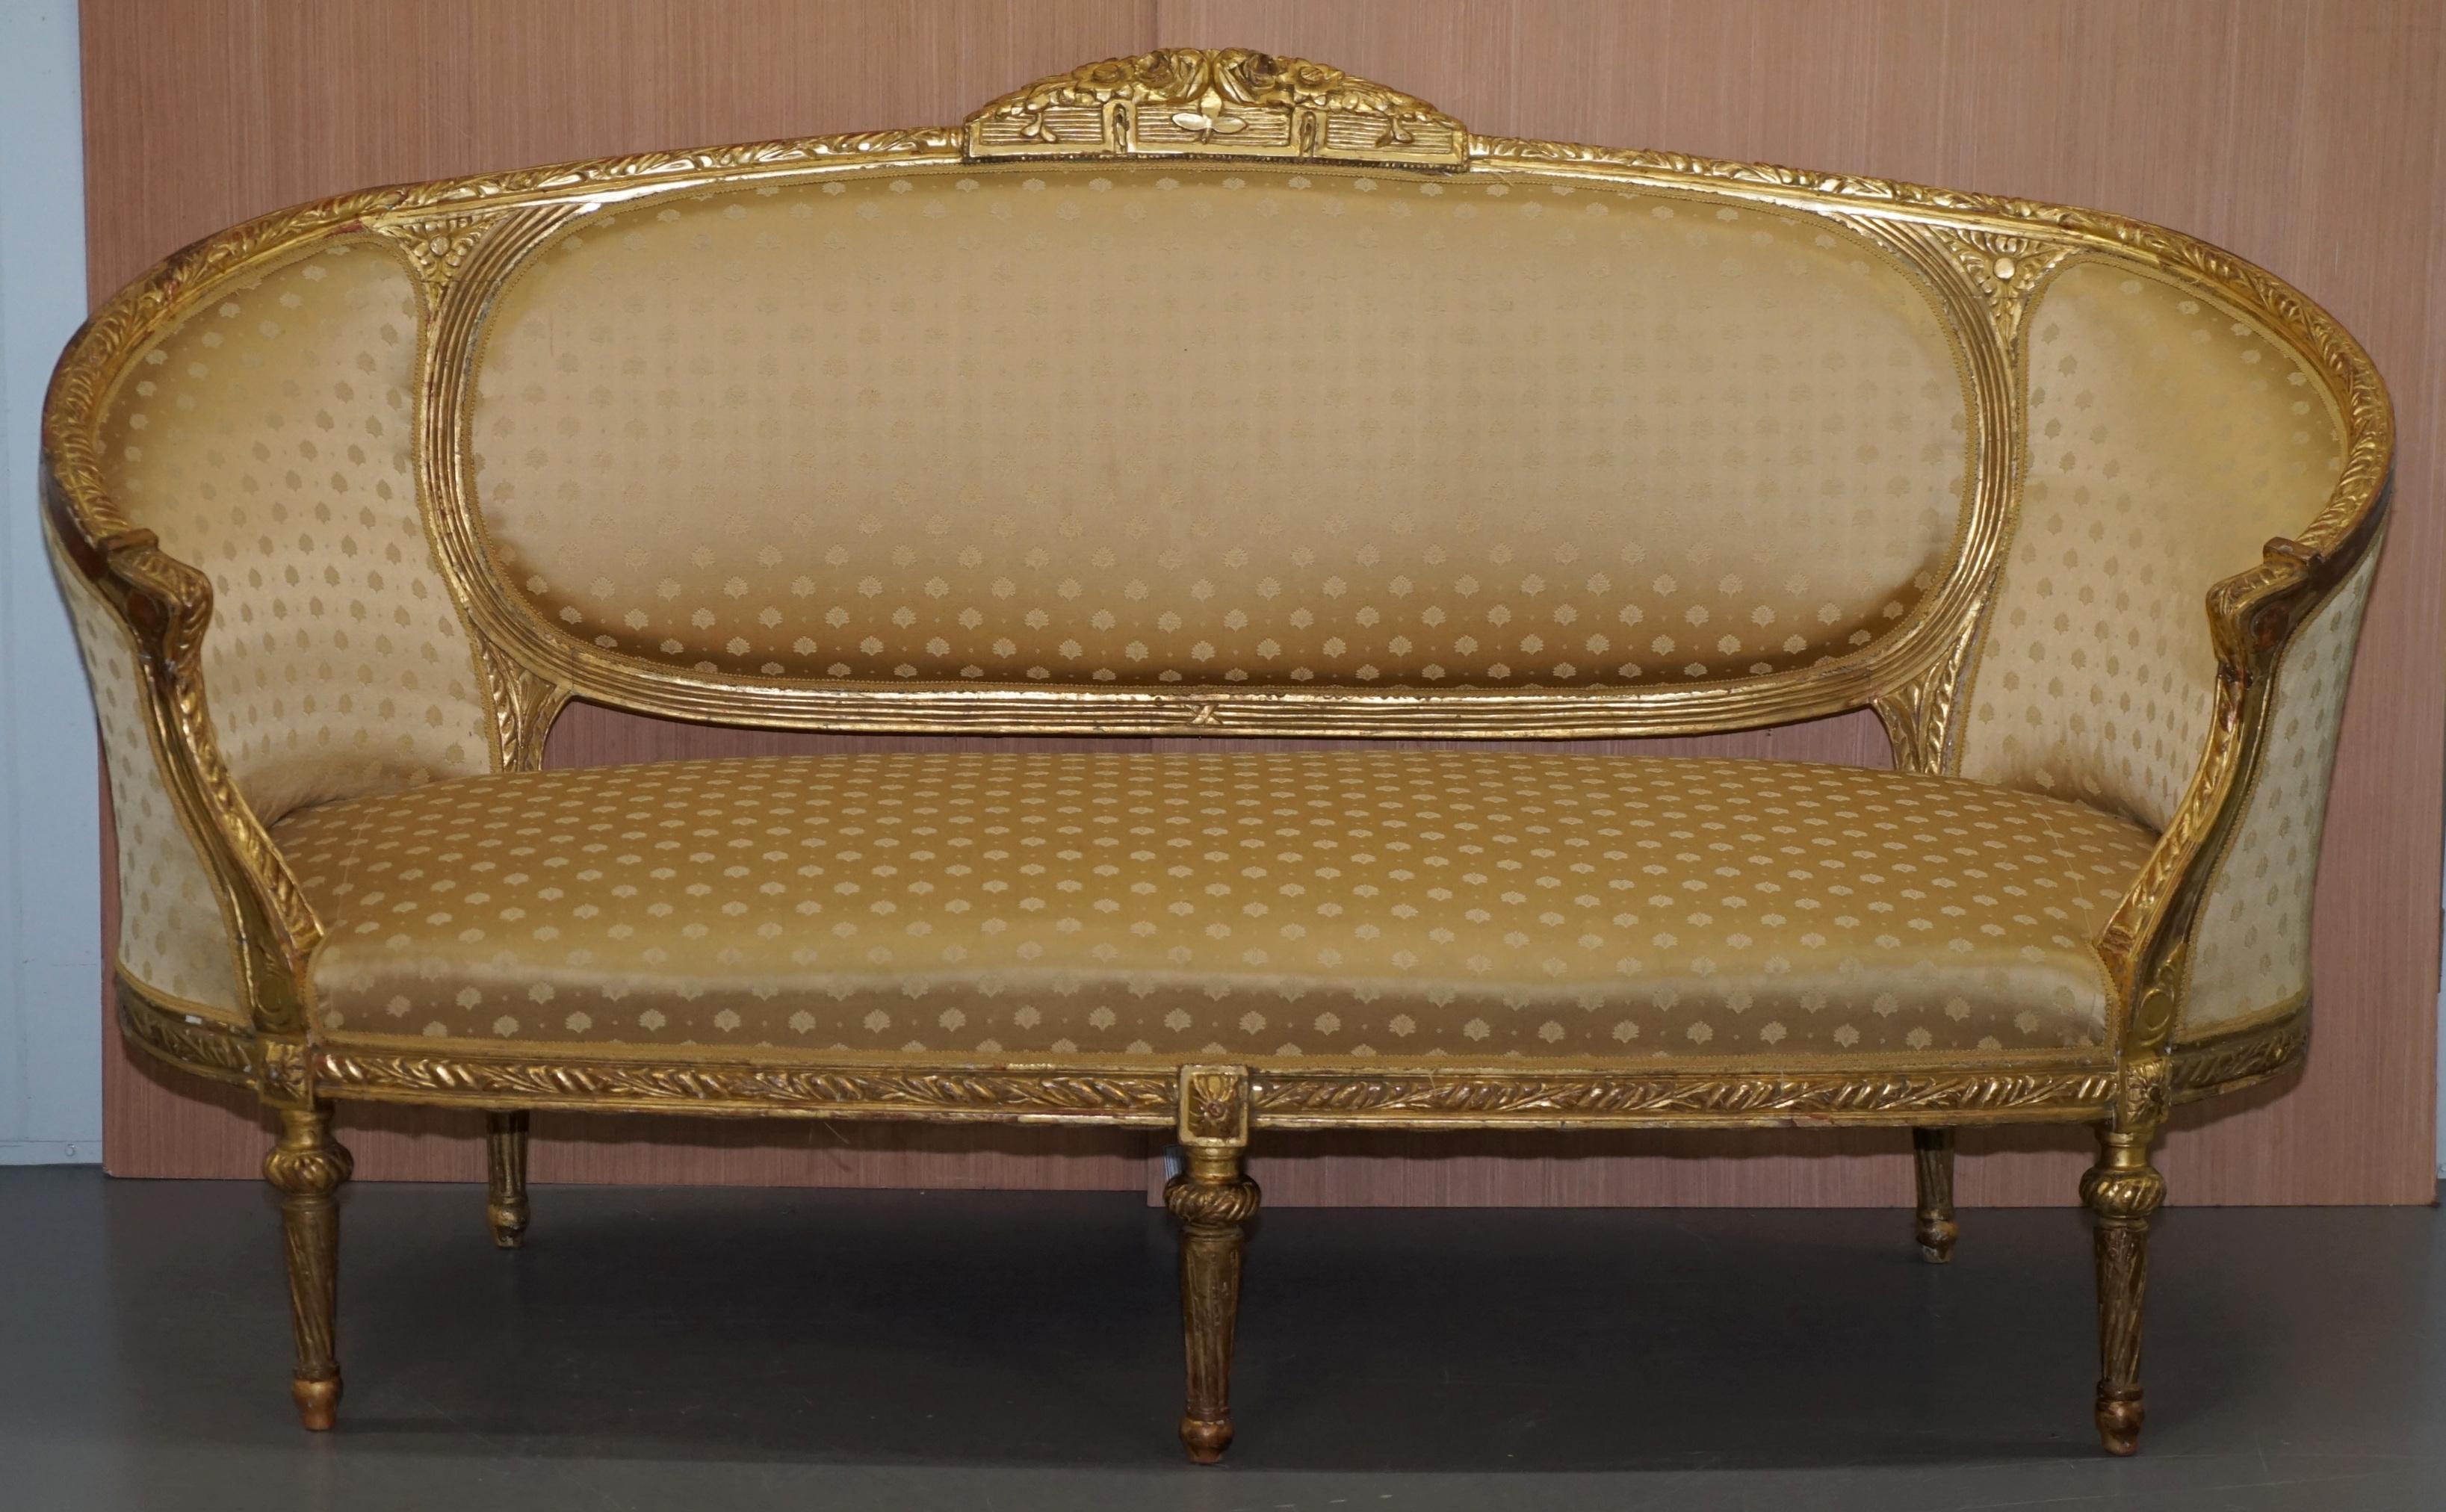 We are delighted to offer for sale this original Napoleon III giltwood circa 1870 Salon sofa which is part of a suite

This set includes two matching armchairs, one is in perfect condition, the other needs a repair, both of which are listed under